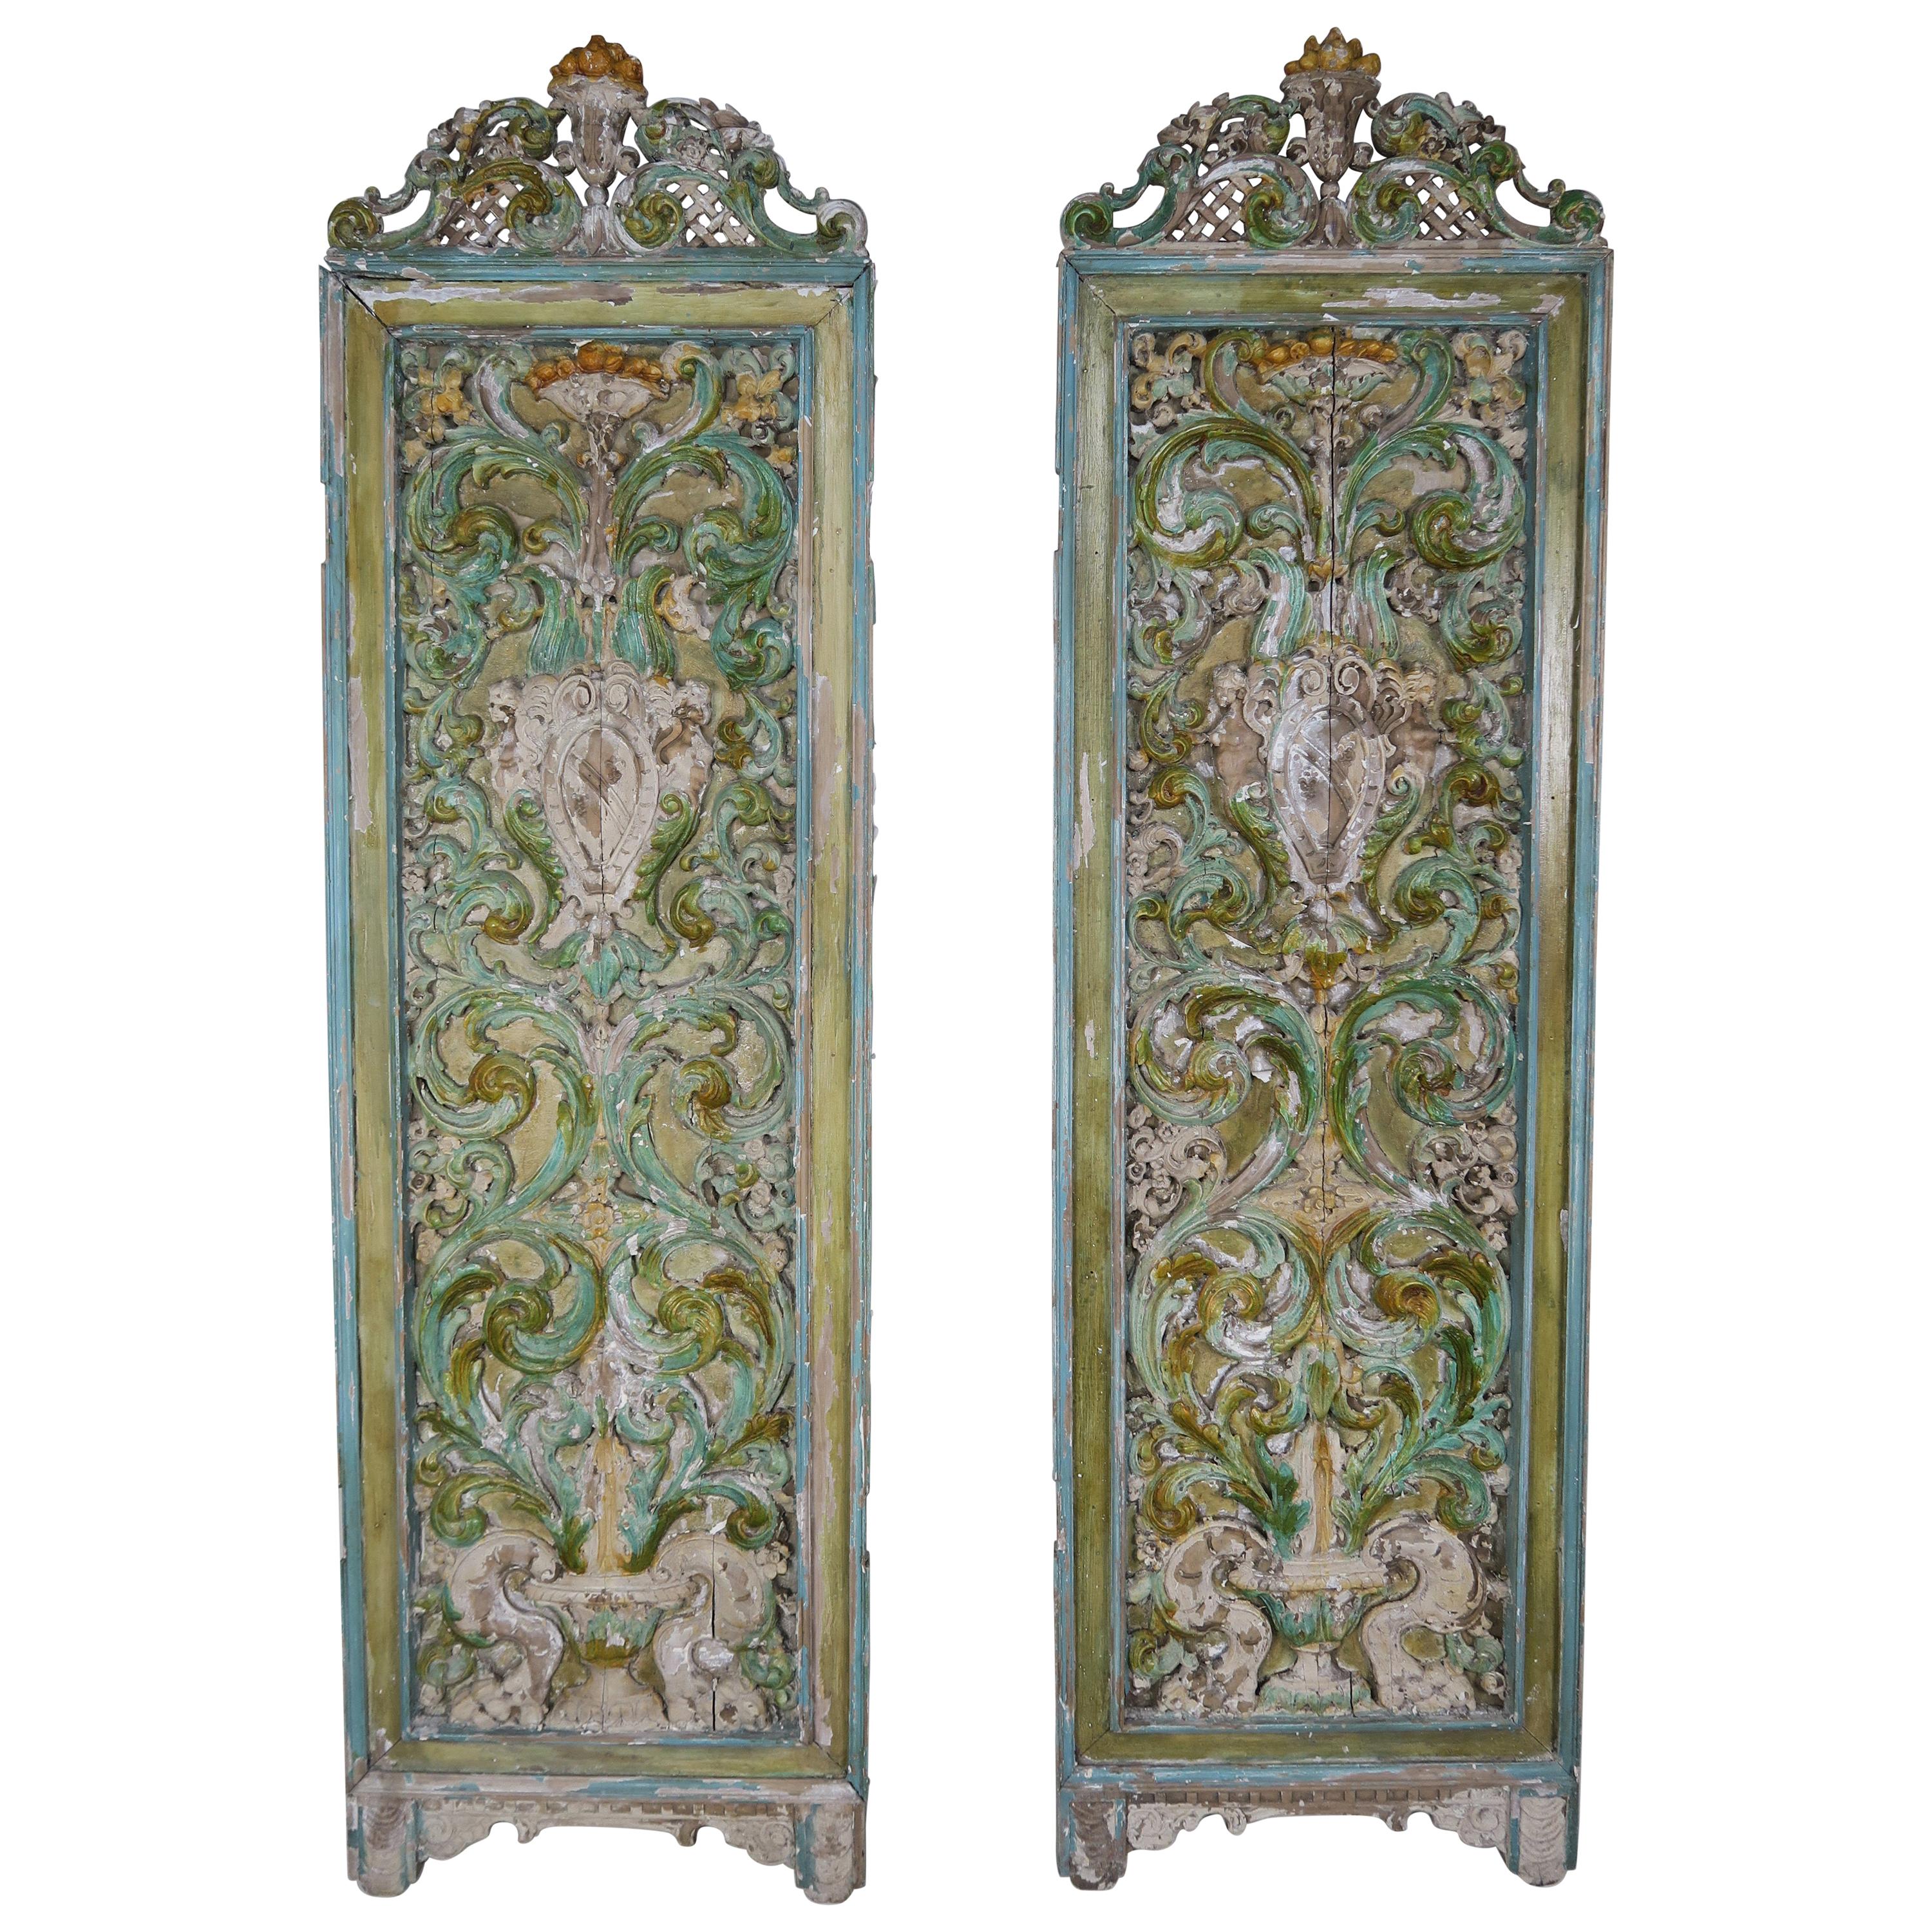 19th Century Italian Painted Carved Wood Panels, Pair